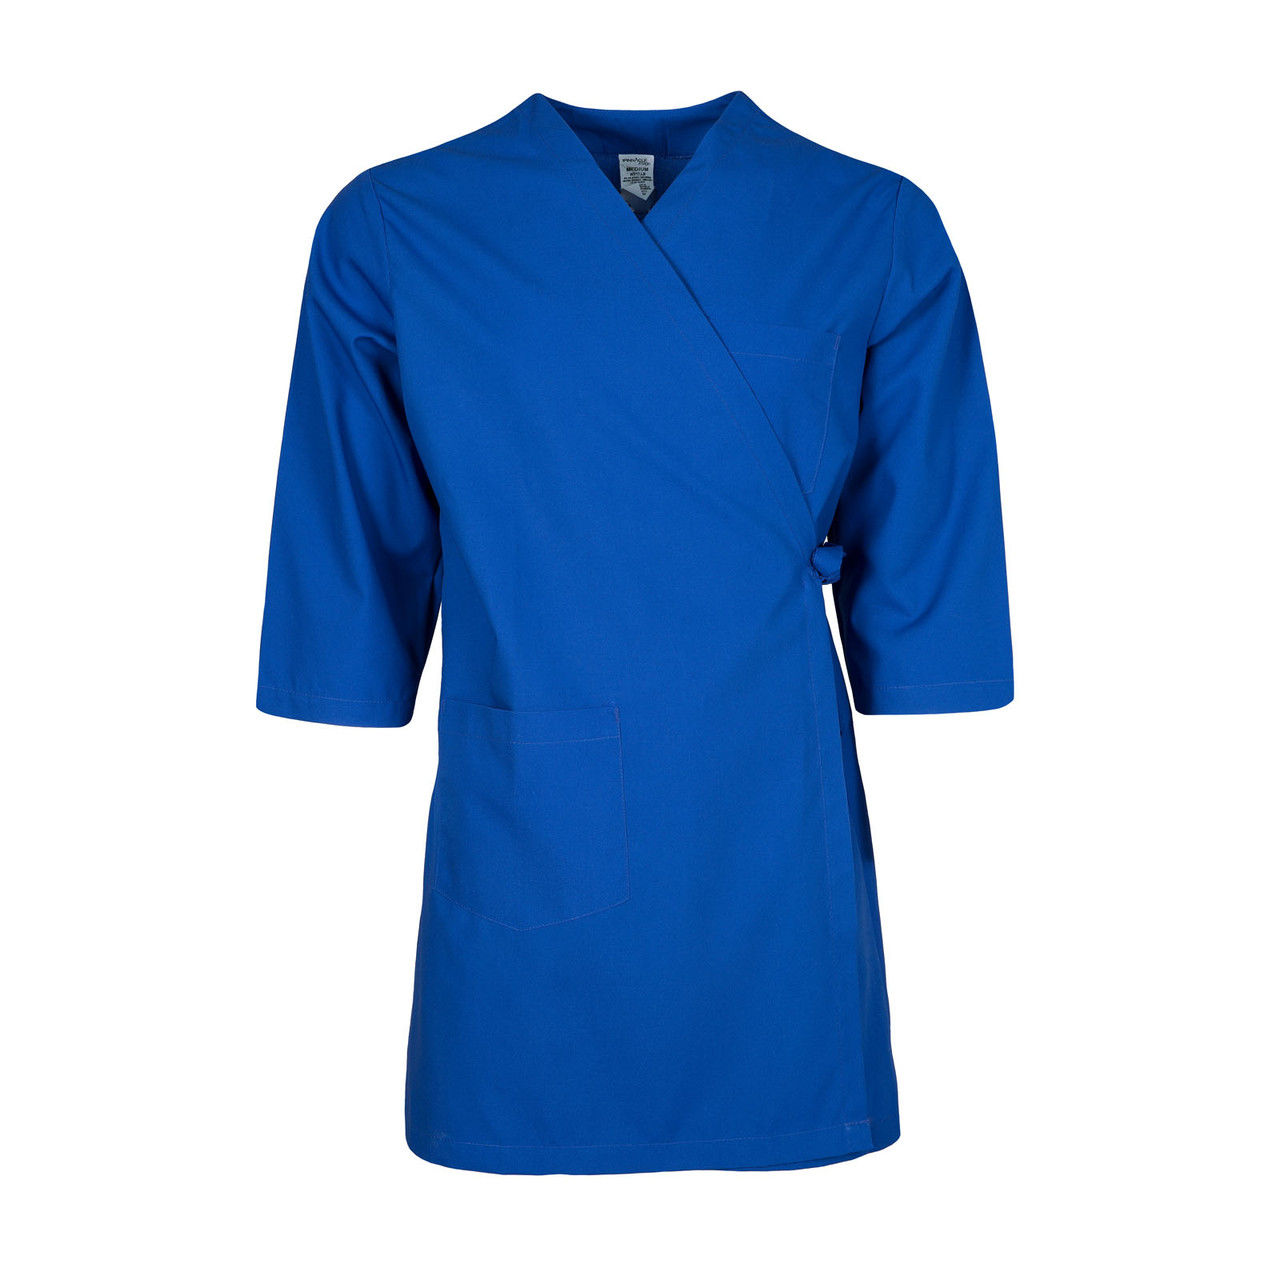 What color is the Royal Blue Wraparound Smock Gown?